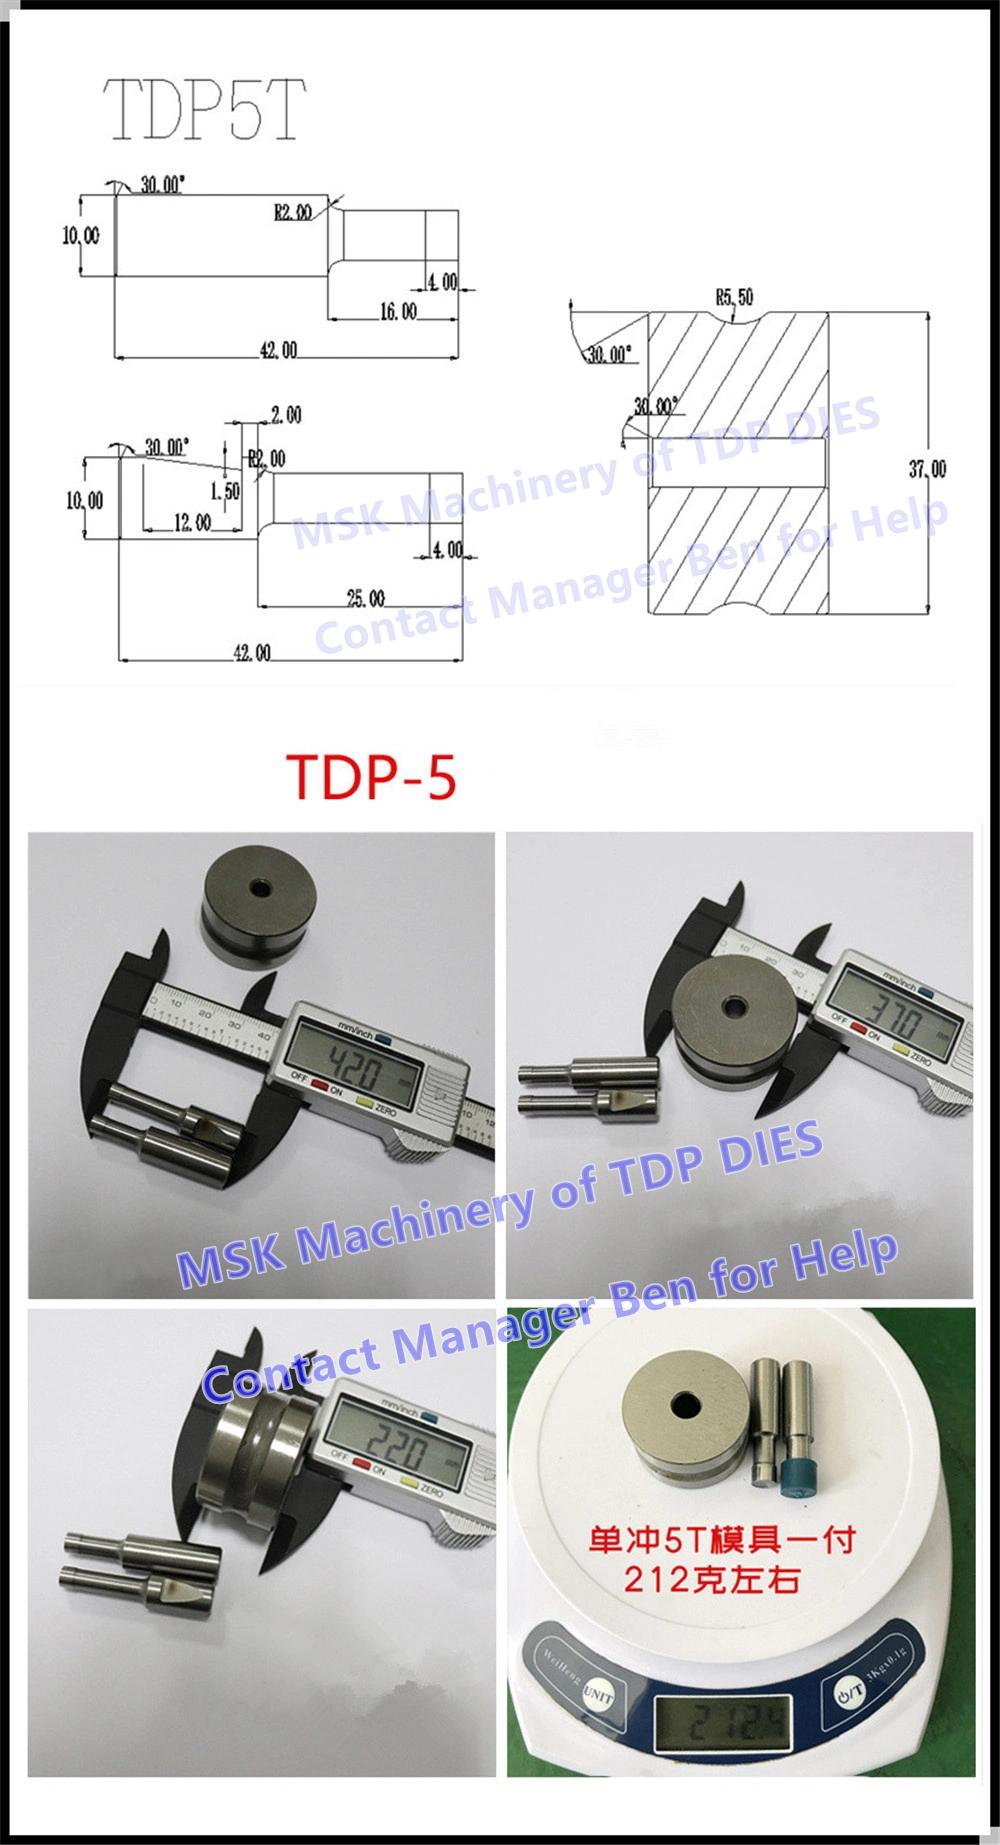 Punch and Die Tdp Single Punch Tdp-0, Tdp1.5, Tdp5, Tdp6 Pill Tablet Press Machine Tungsten Carbide Punching Mold Tool